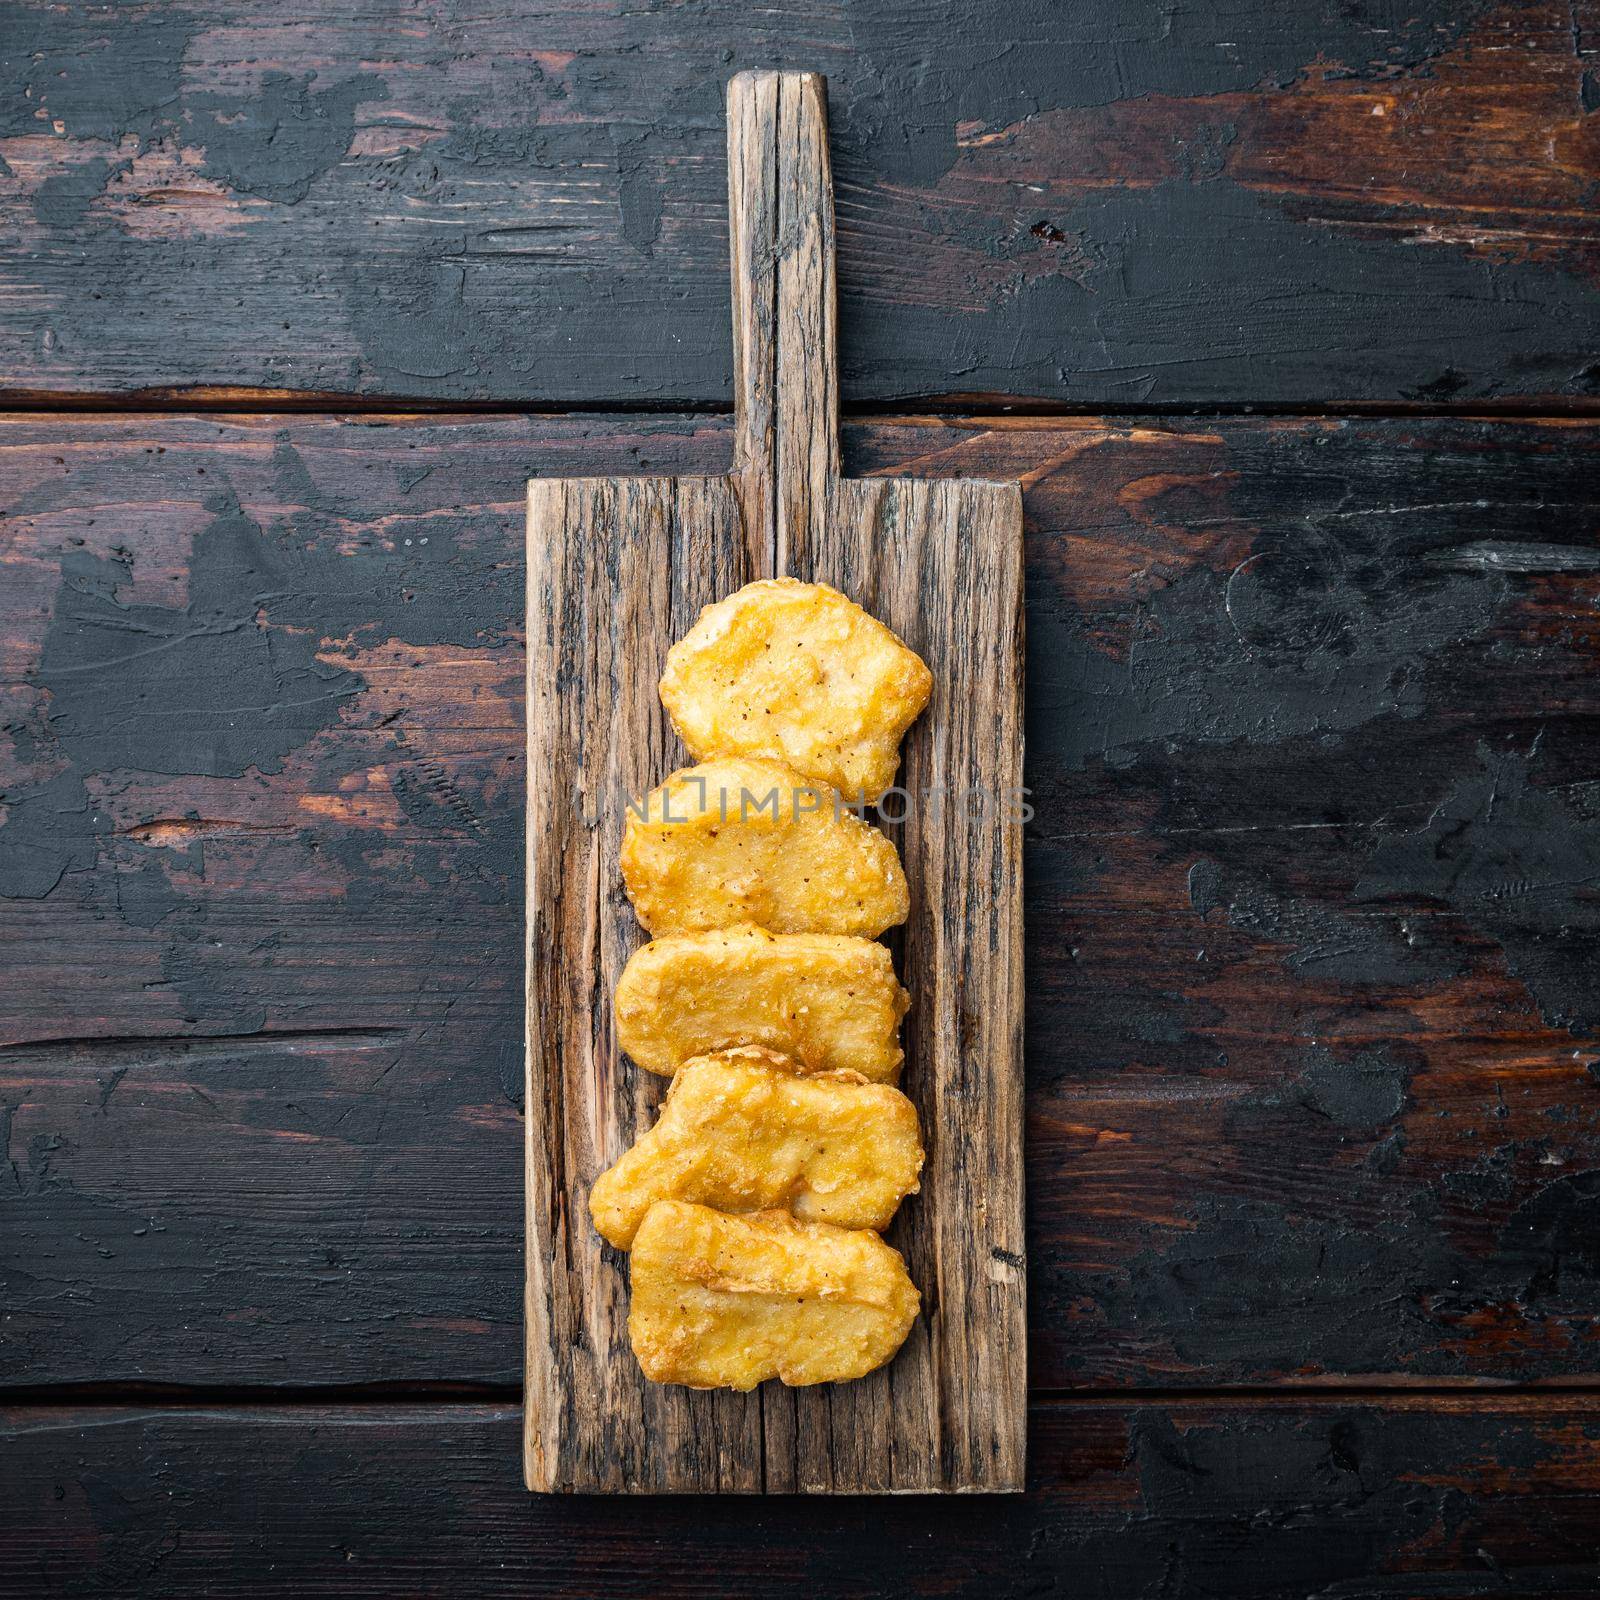 Chicken nuggets on dark wooden background, with space for text by Ilianesolenyi